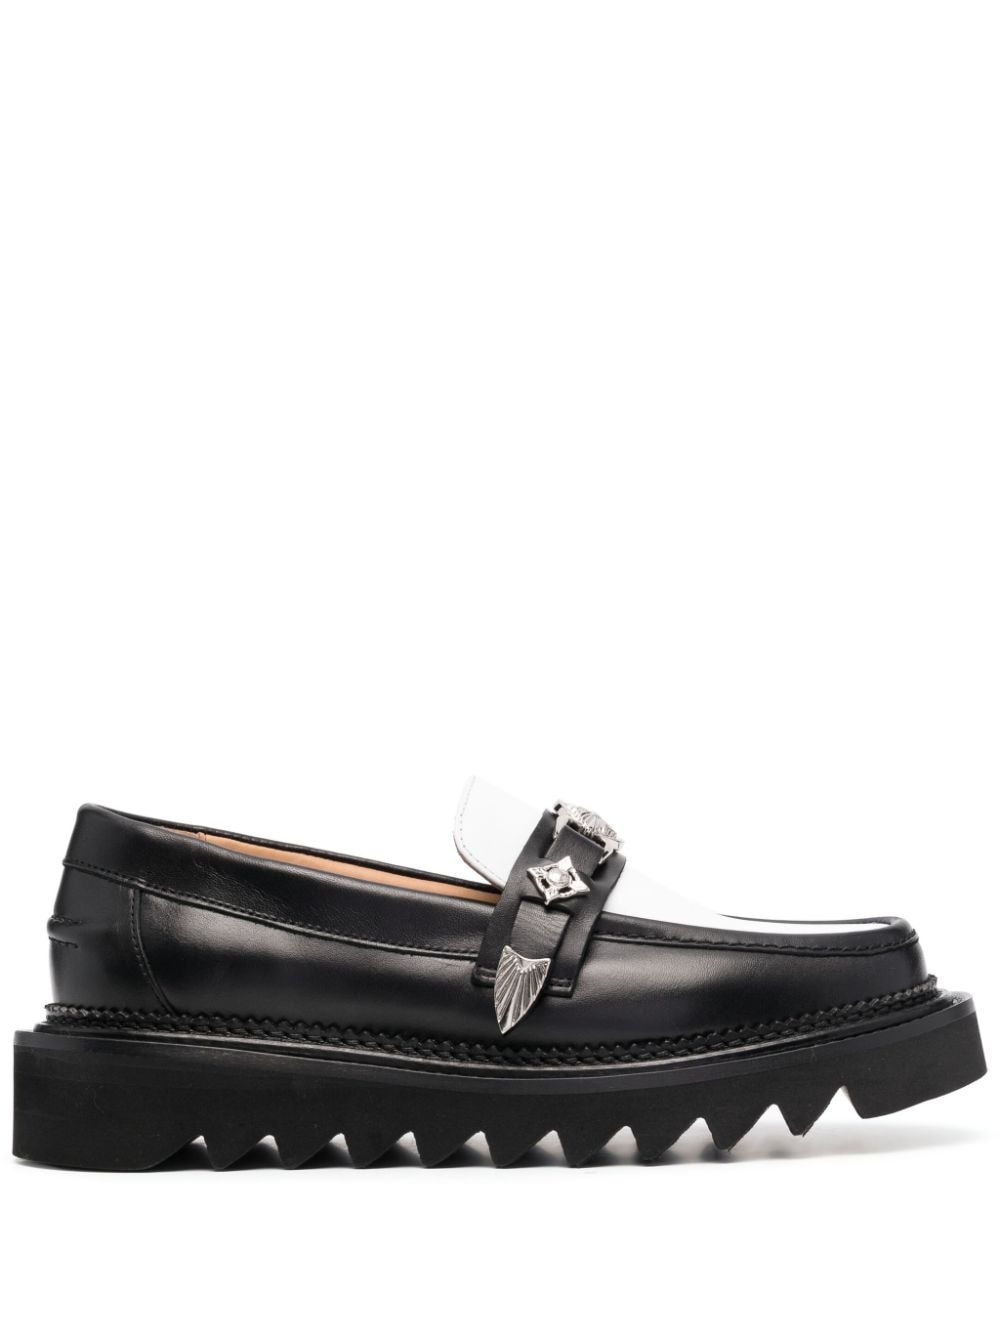 Toga Pulla buckle-detail leather loafers - Black von Toga Pulla